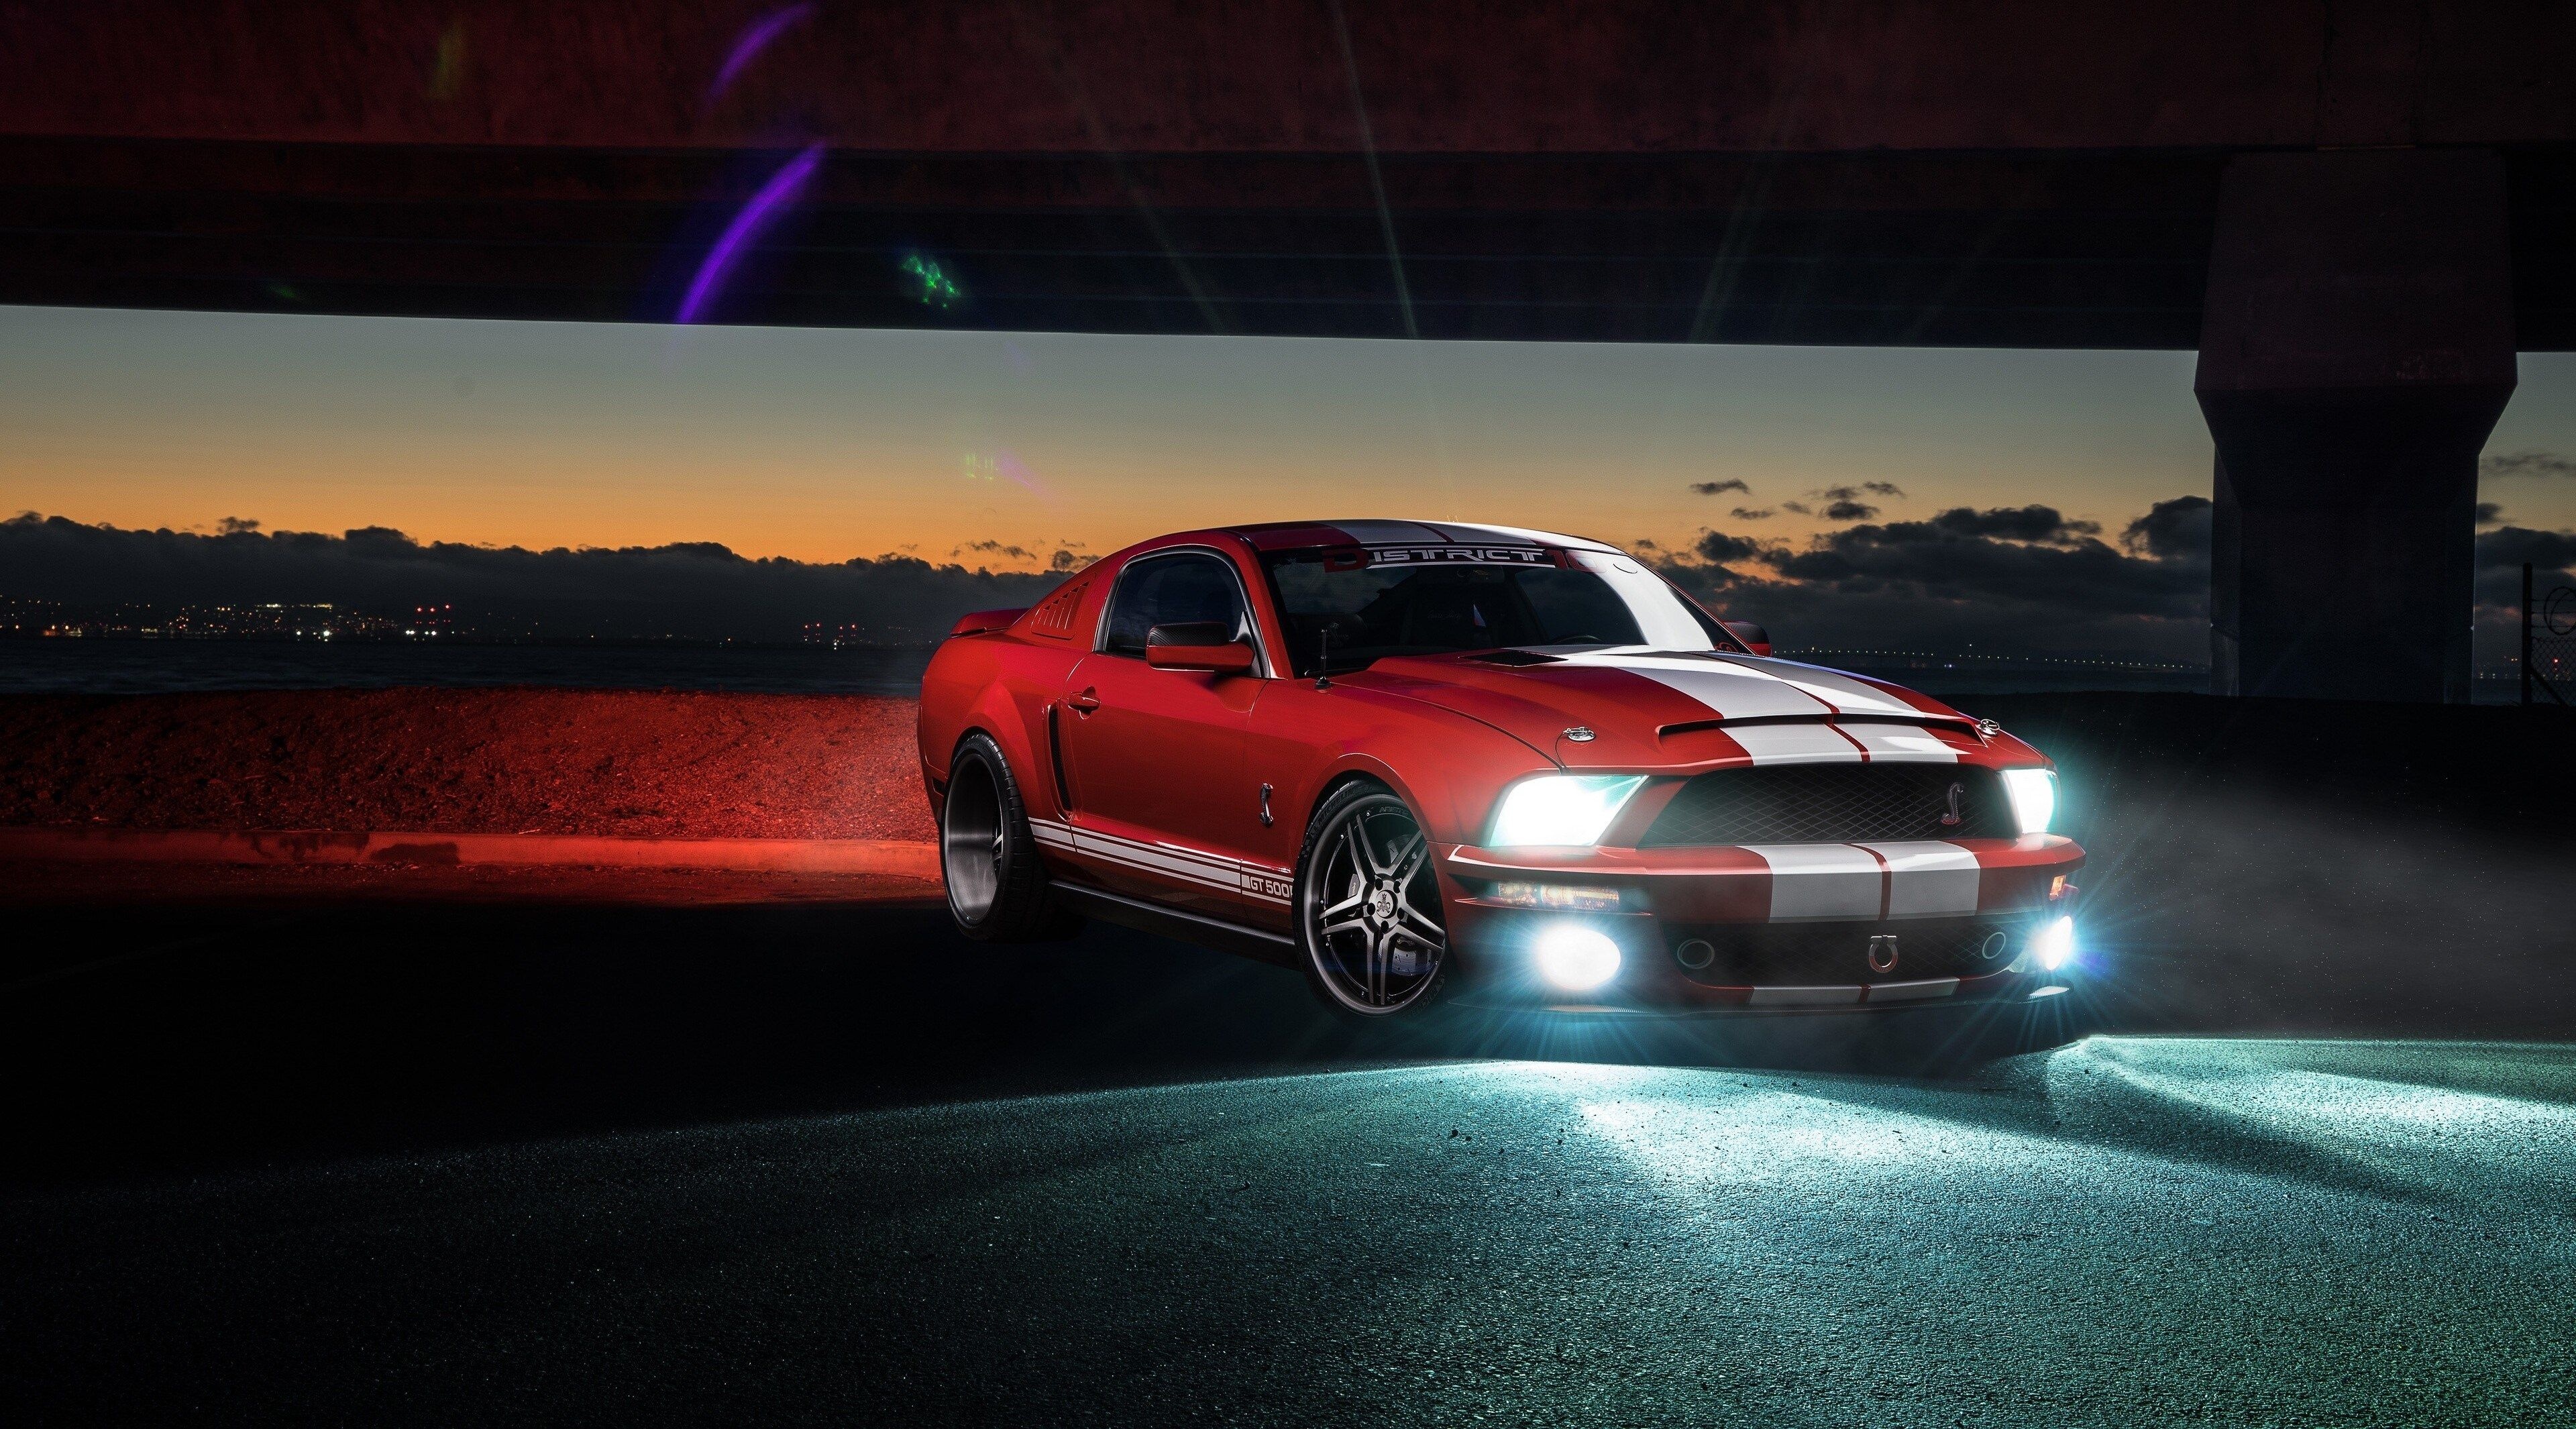 Shelby GT500, Supercharged performance, Precision engineering, Racing heritage, Track-ready monster, 3840x2130 HD Desktop